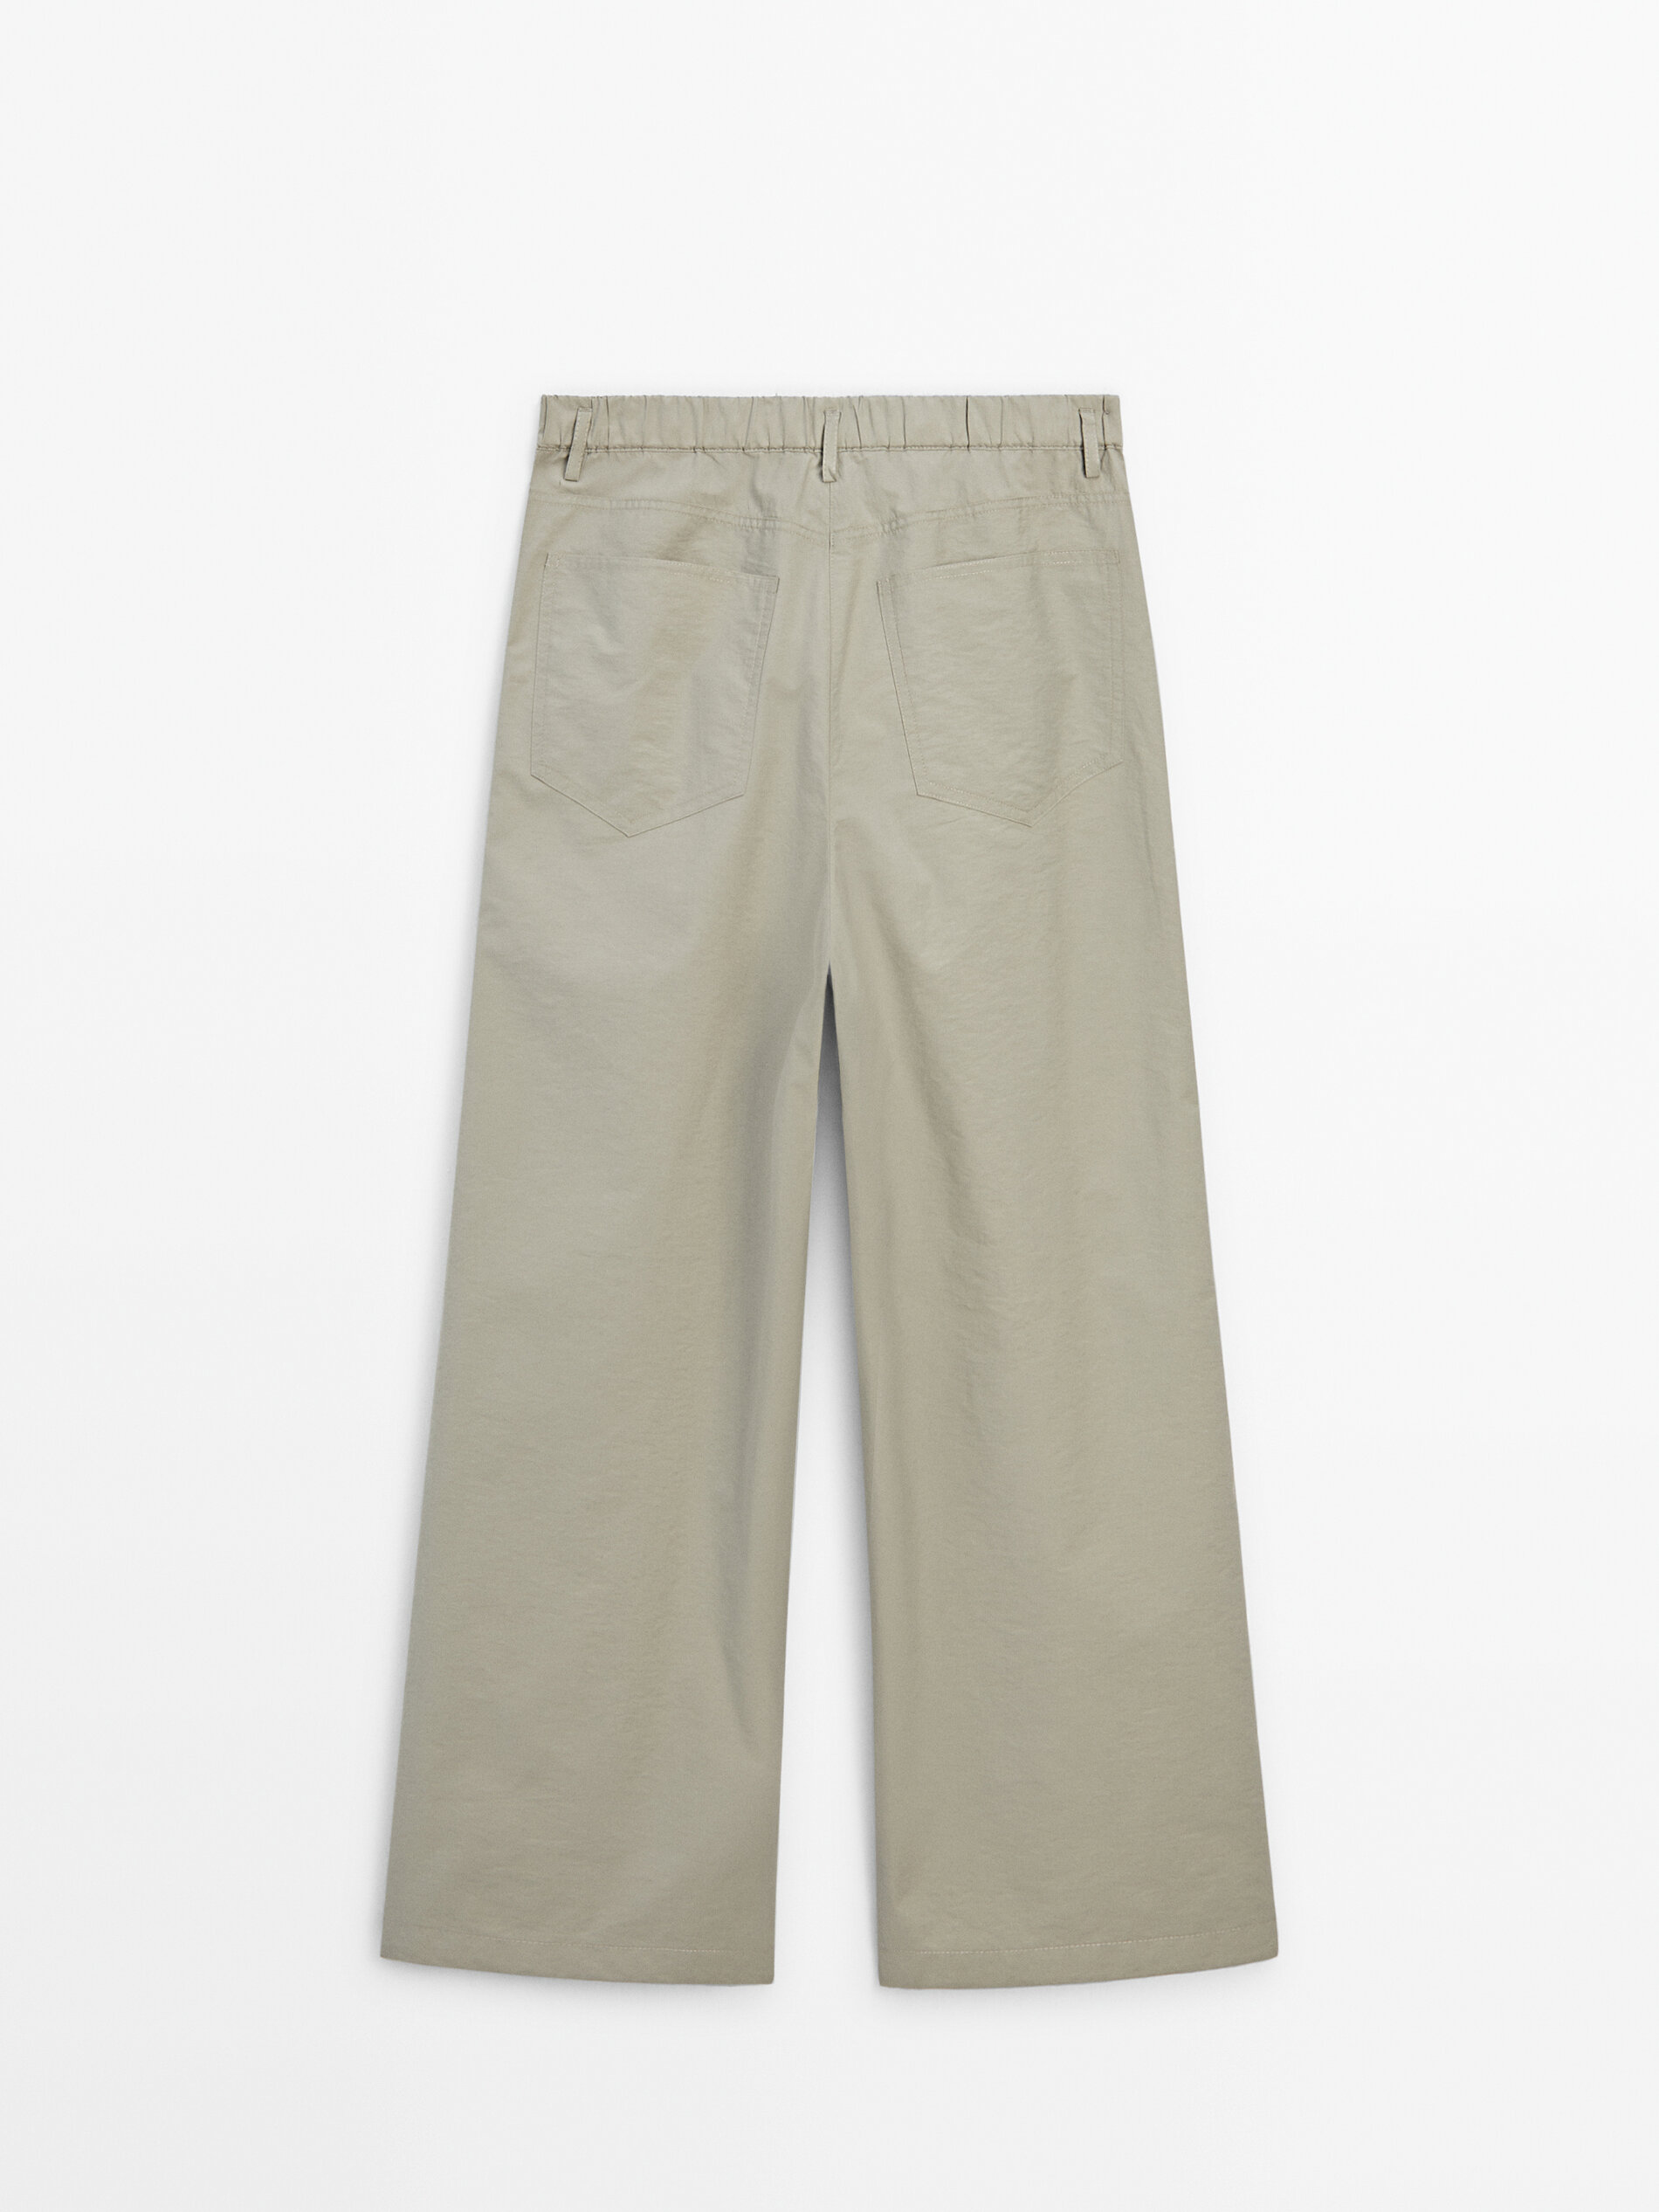 Post Archive Faction (PAF) Convertible Grey & Blue 4.0 Center Technical  Trousers